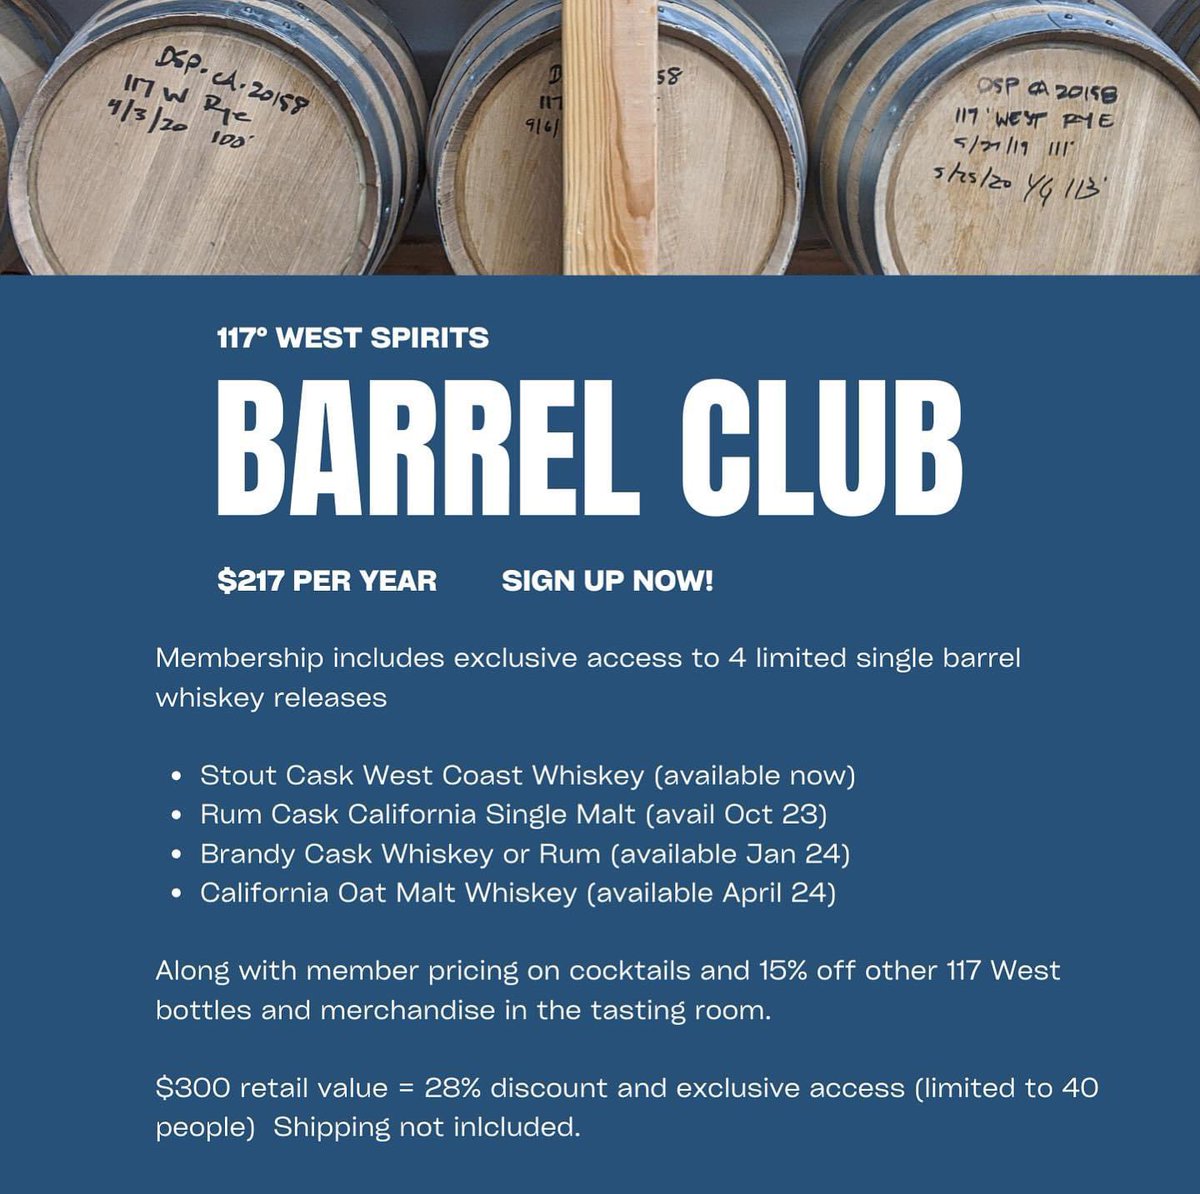 Here’s your chance to join the 117 West Spirits Club. Available in their tasting room 🥃🍹
Thursday-Friday 4-7pm 
Saturday 3-7pm

#drinkstime #drinkdrinkdrink #drinkthis #drinkaroundtheworld #drinklocally #craftdrinnks #cheers #smallbatches #bigideas #agedgin #craftwhiskey